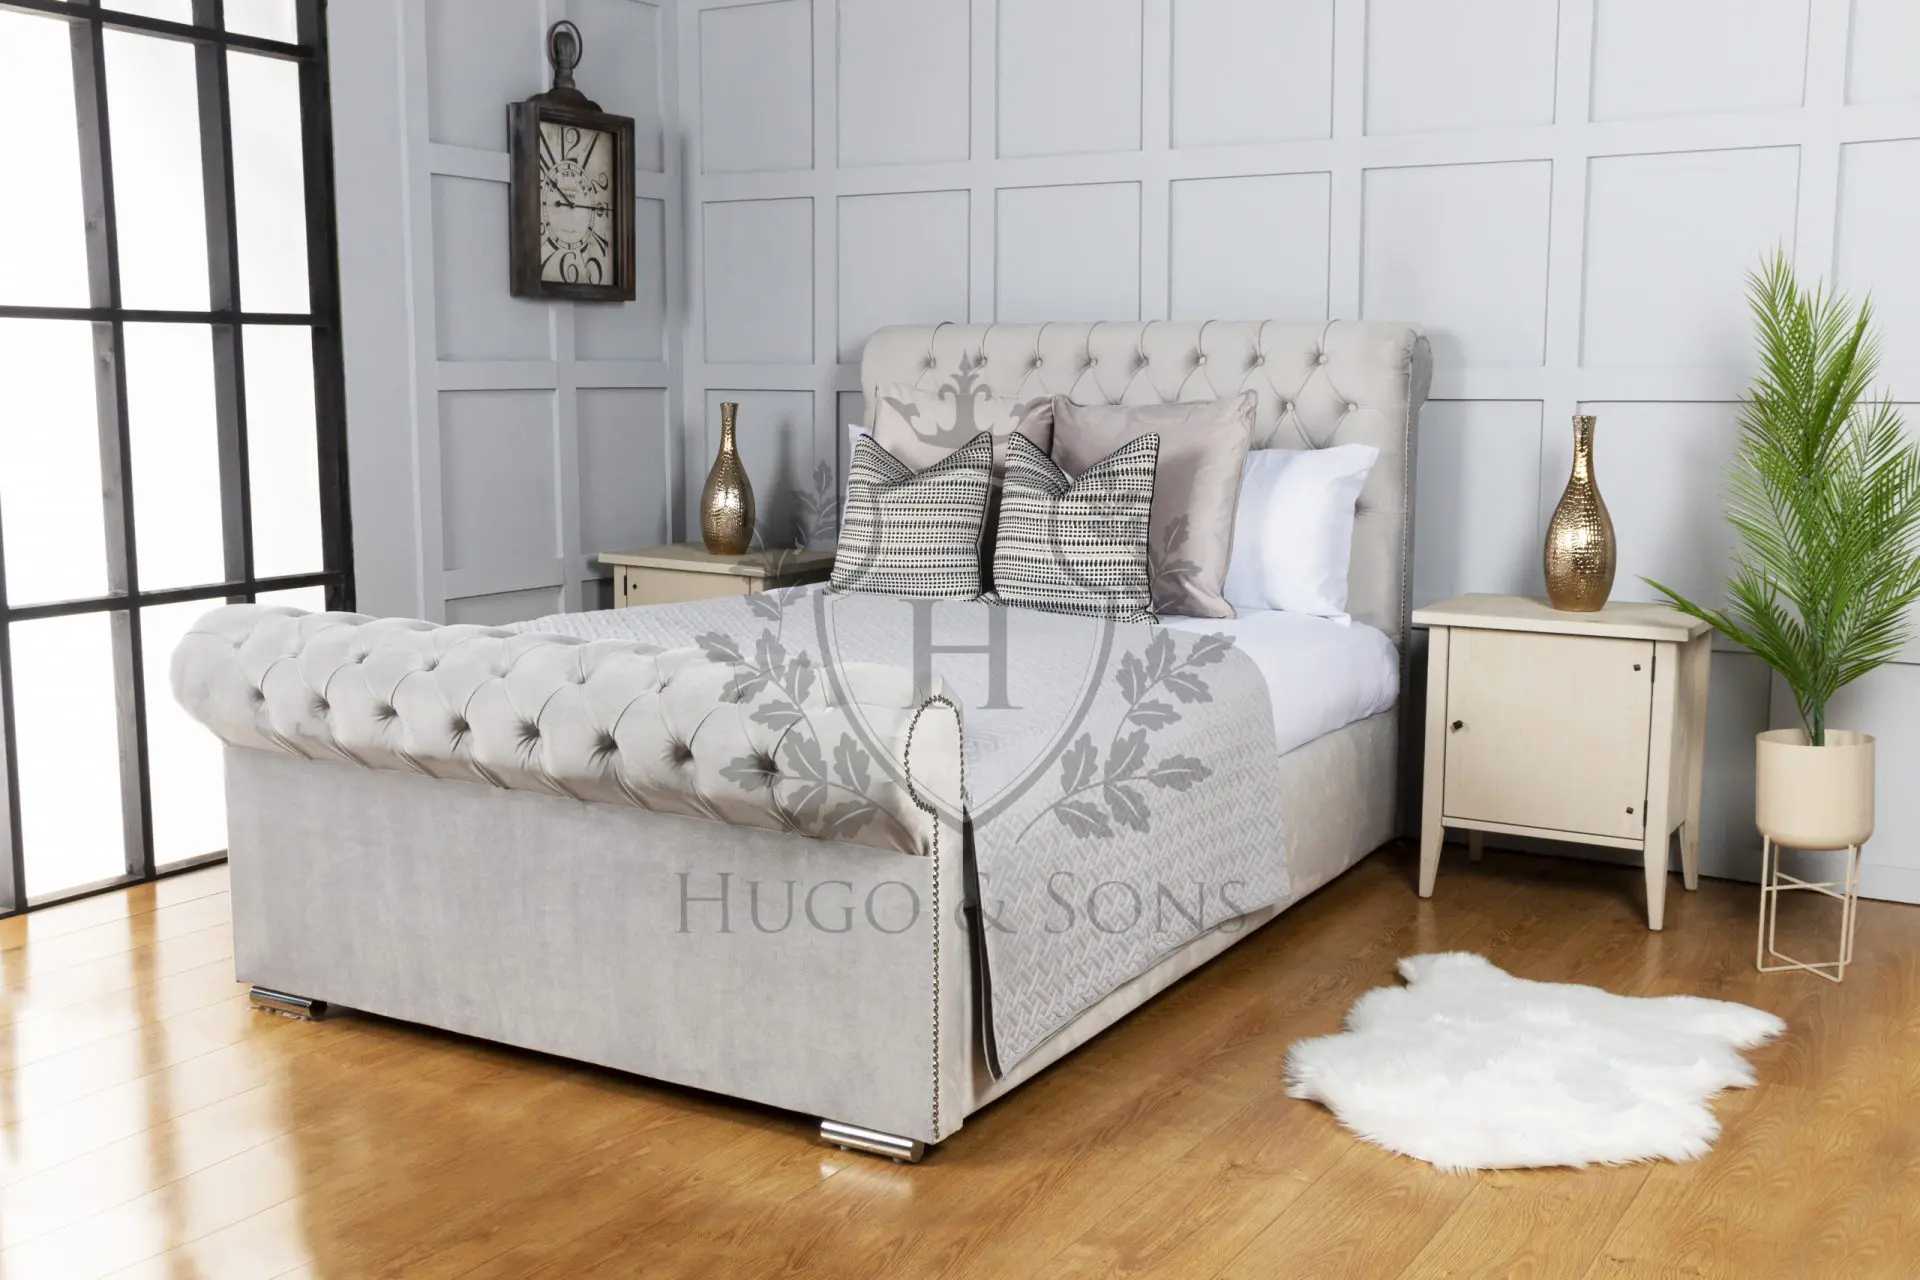 Hugo & Sons image of the Chesterfield Sleigh Bed